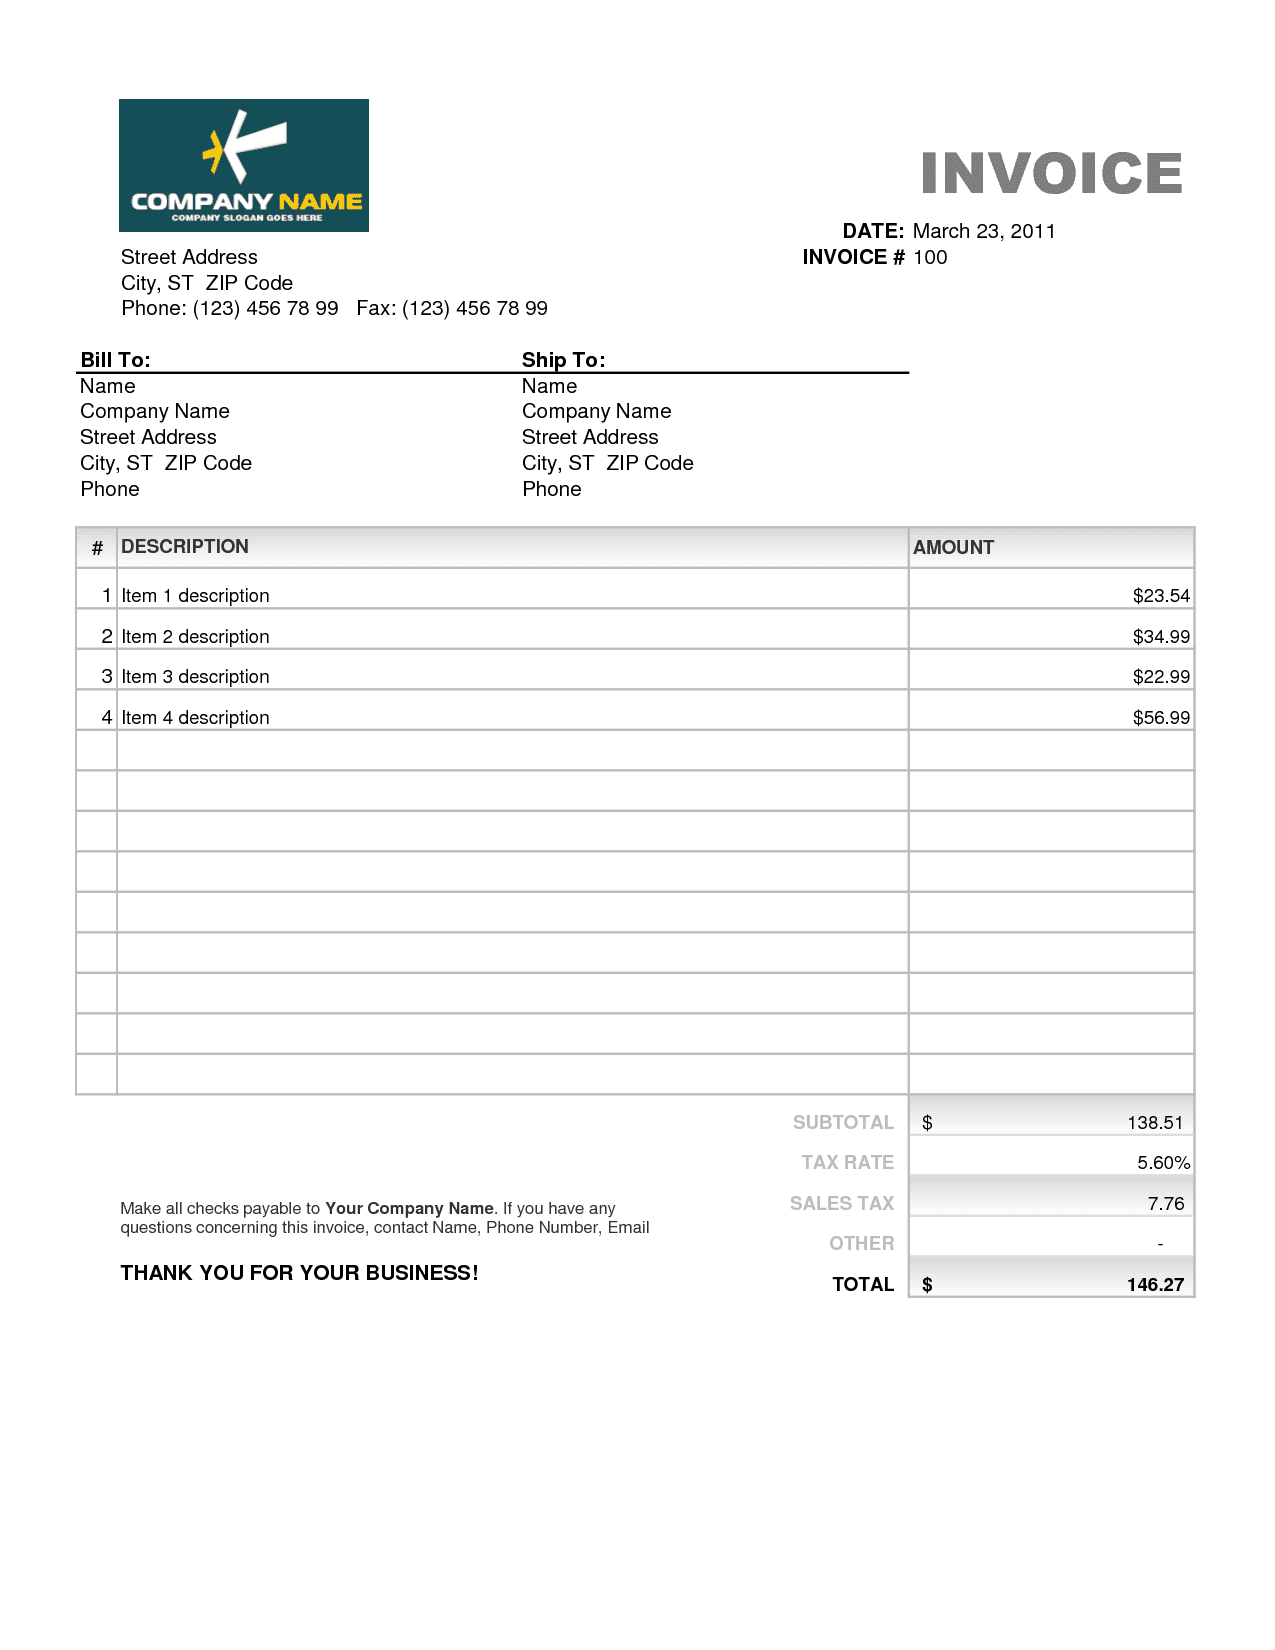 invoice-template-excel-free-download-spreadsheet-templates-for-busines